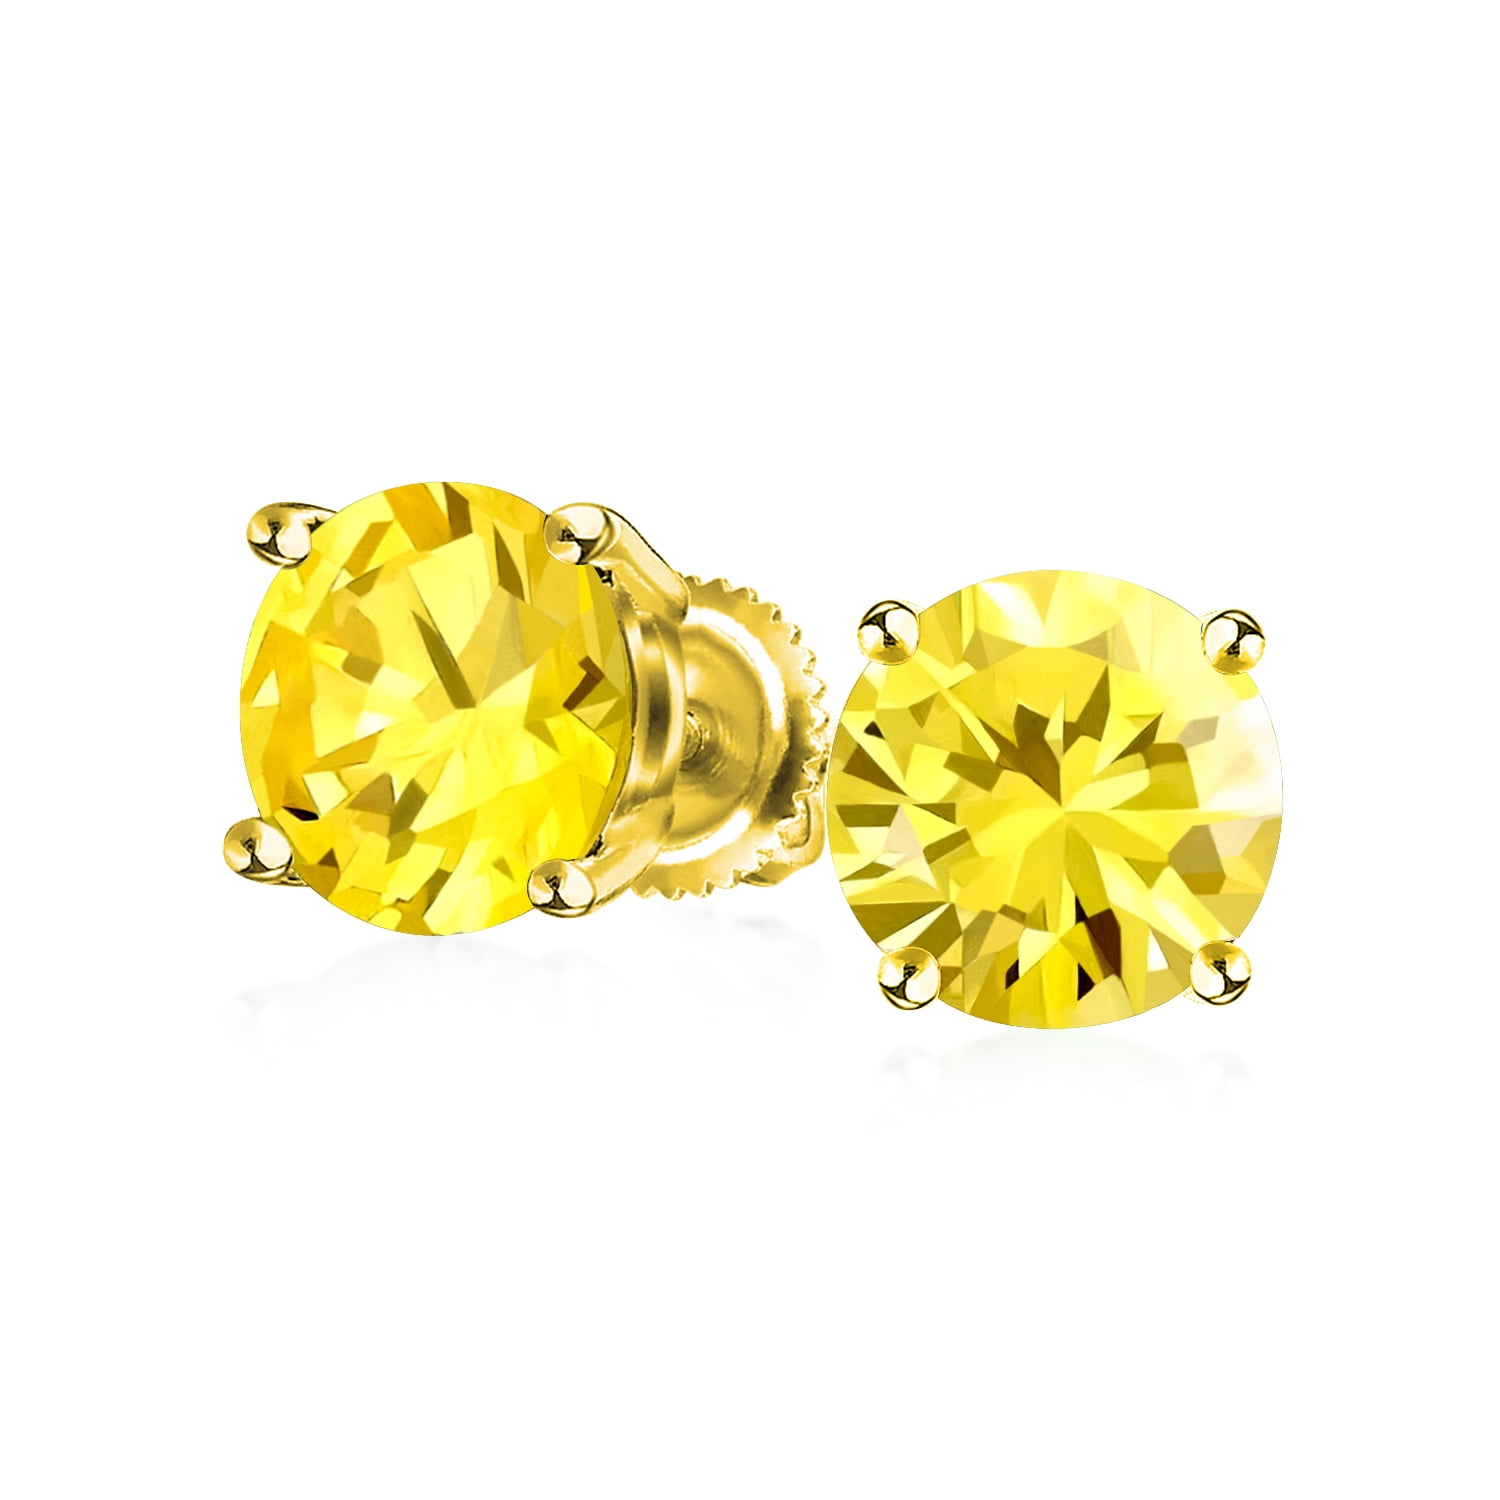 Canary Yellow CZ Stud Earrings 14K Gold Plated Sterling Silver Screwback 